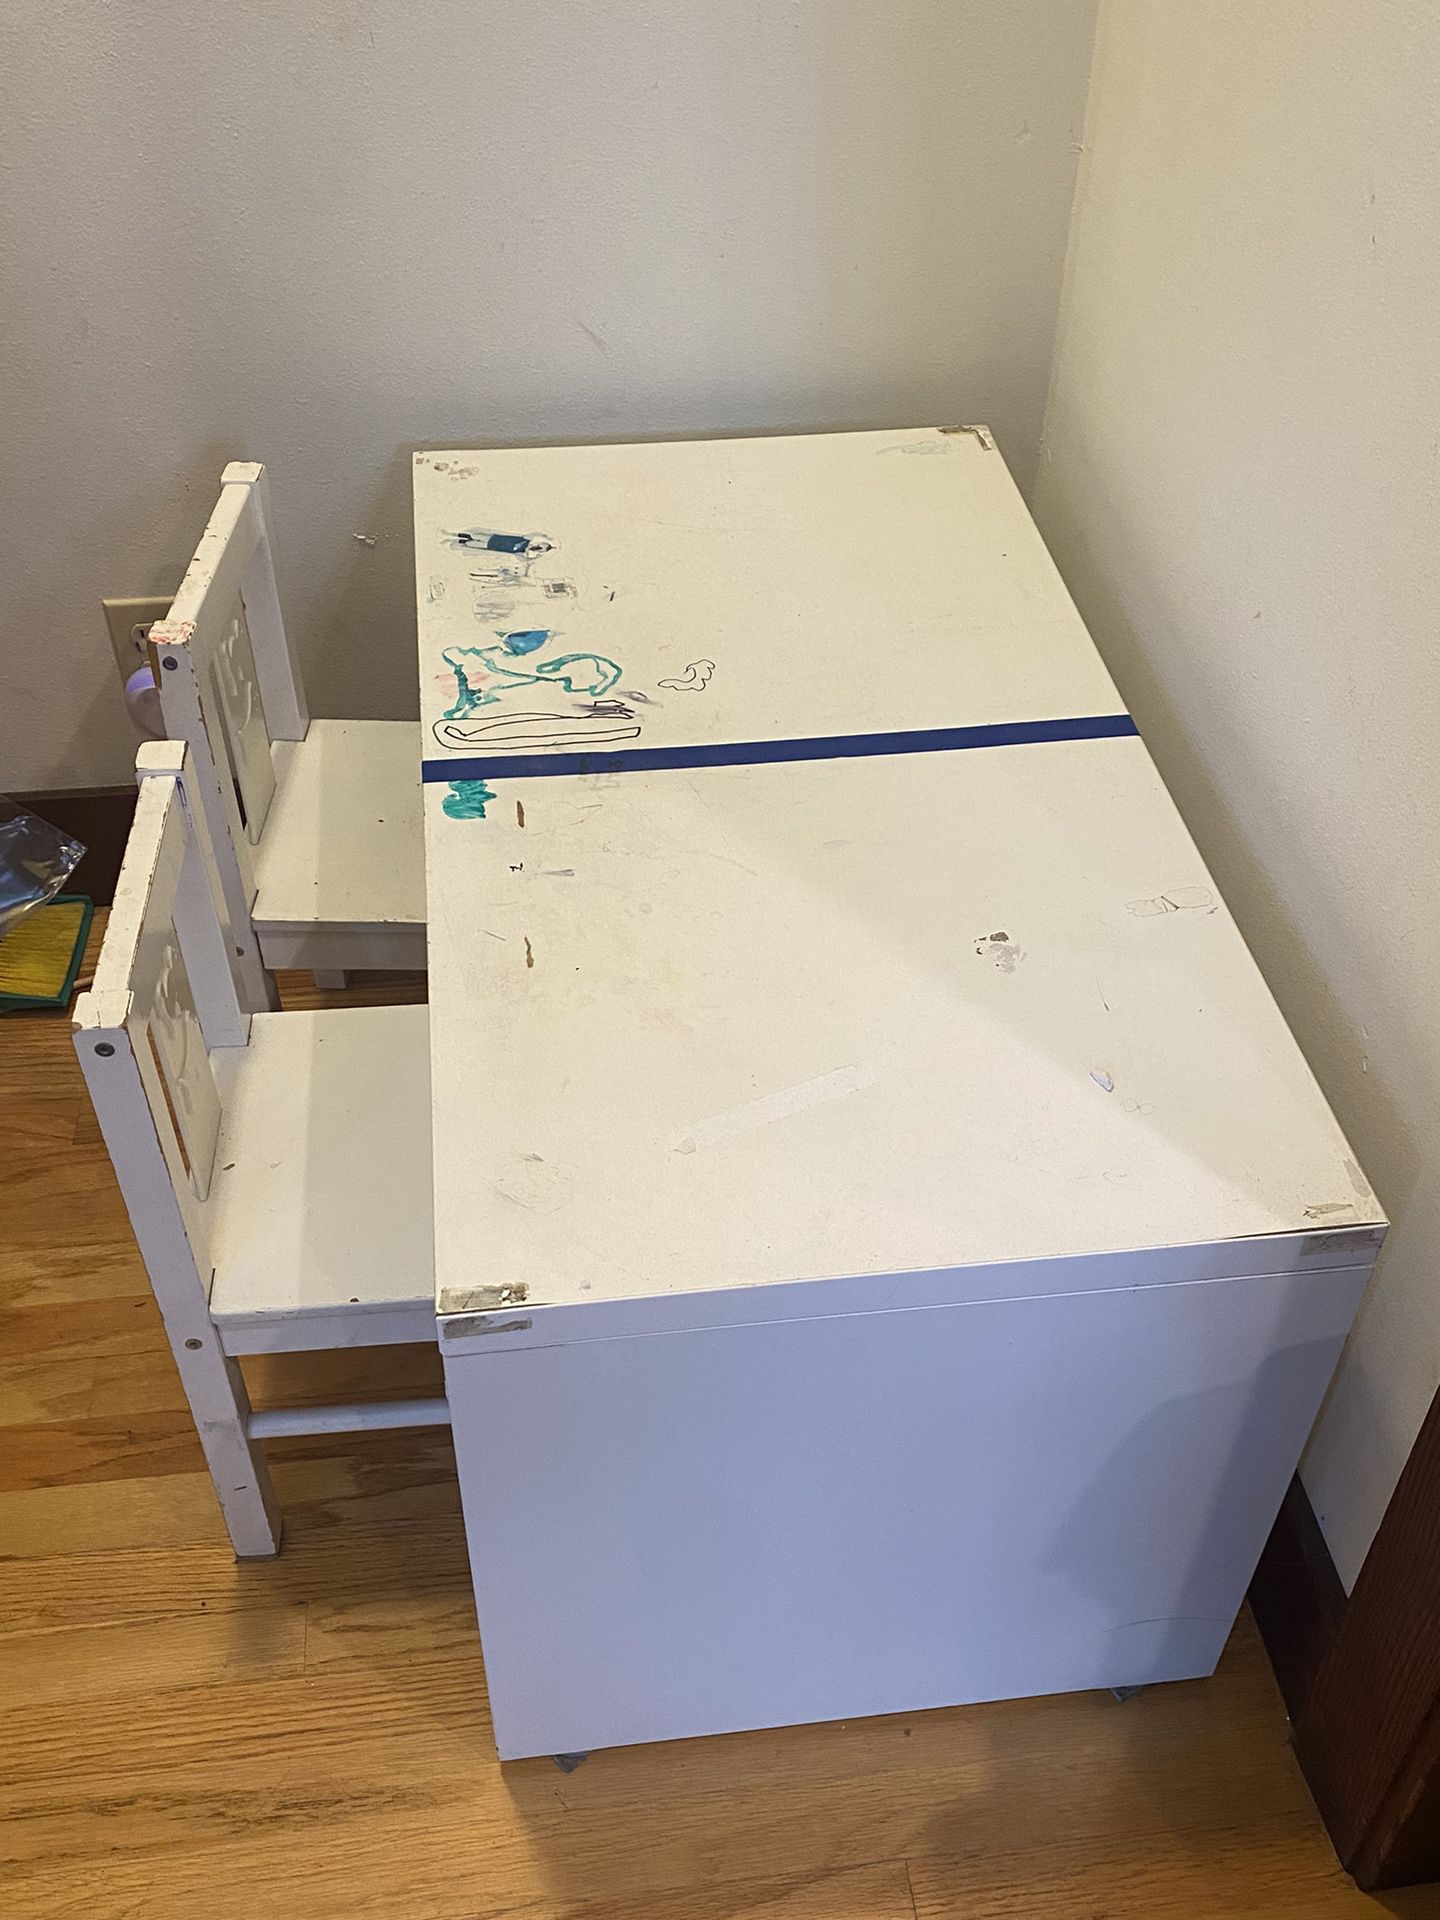 Kid’s Desk/Table with Two Chairs